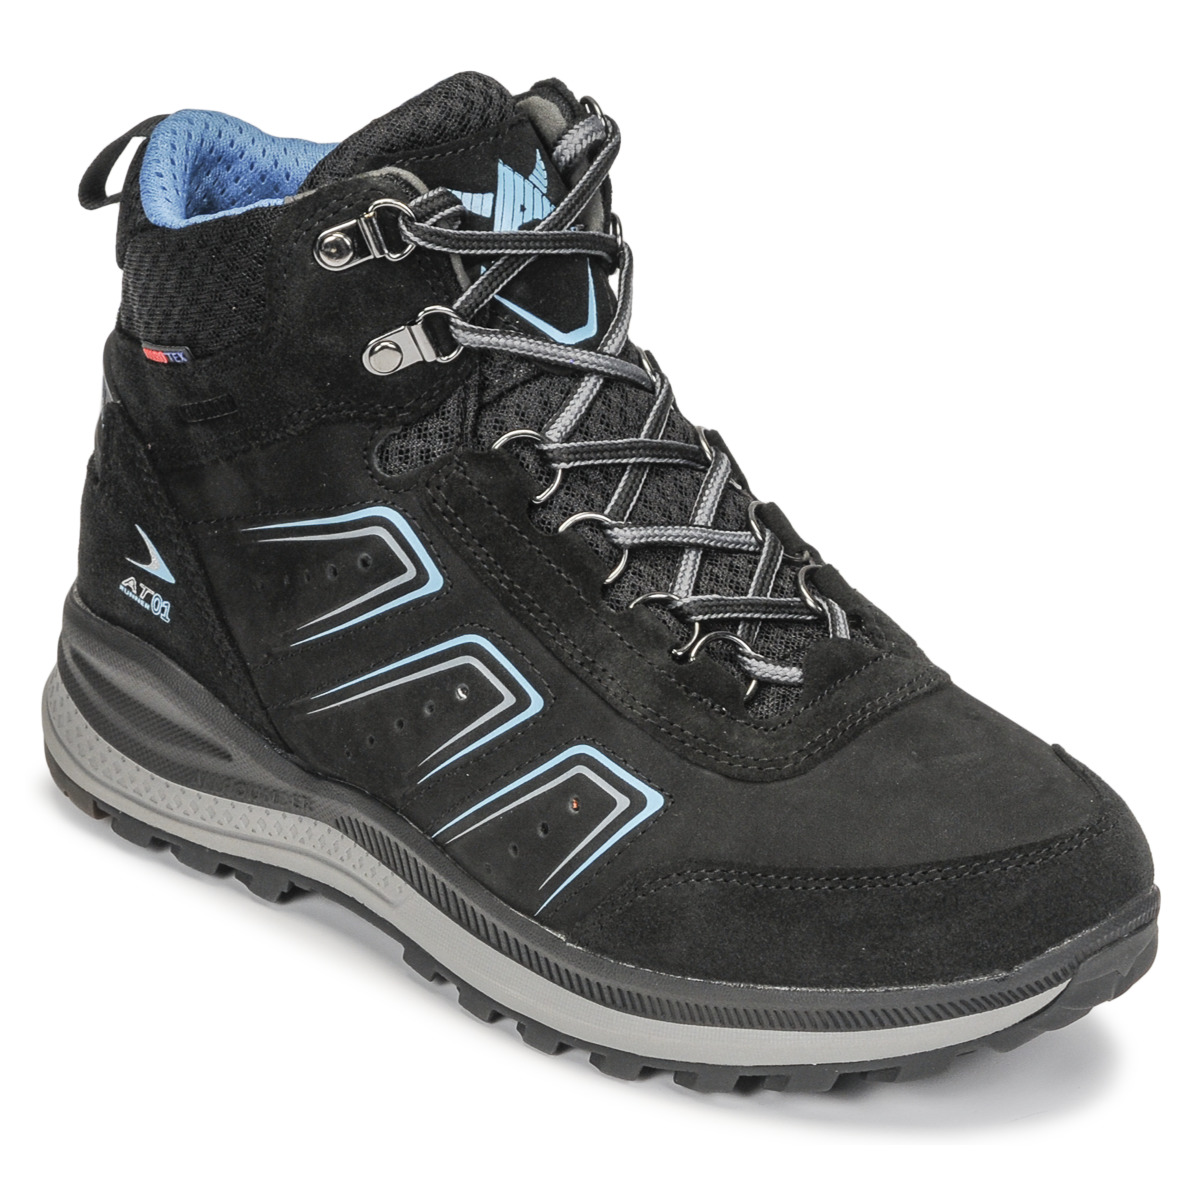 Shoes Women Hiking shoes Allrounder by Mephisto SATIKA TEX Black / Blue